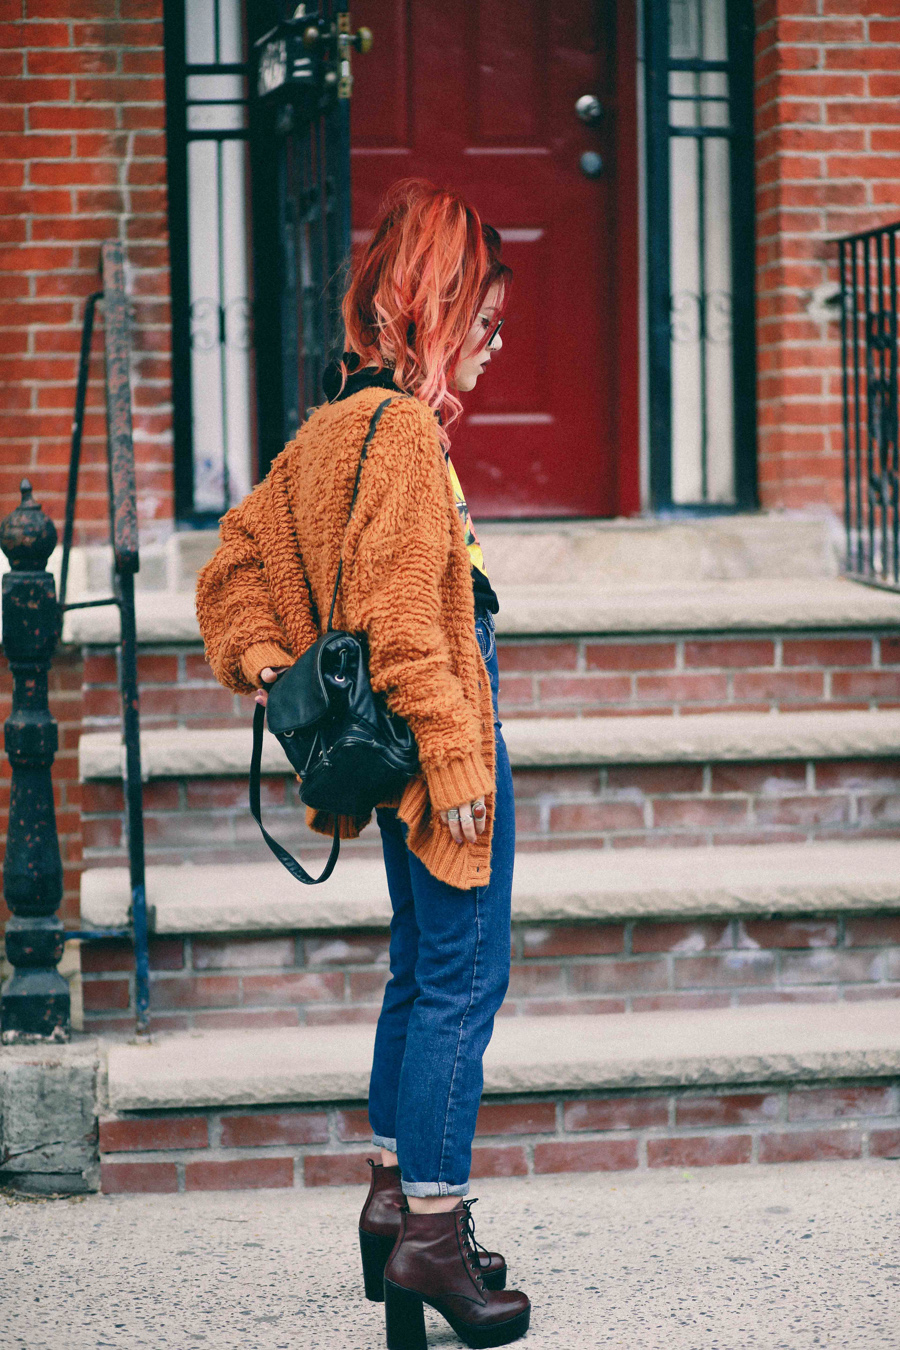 Le Happy wearing chunky sweater and Steve Madden red booties